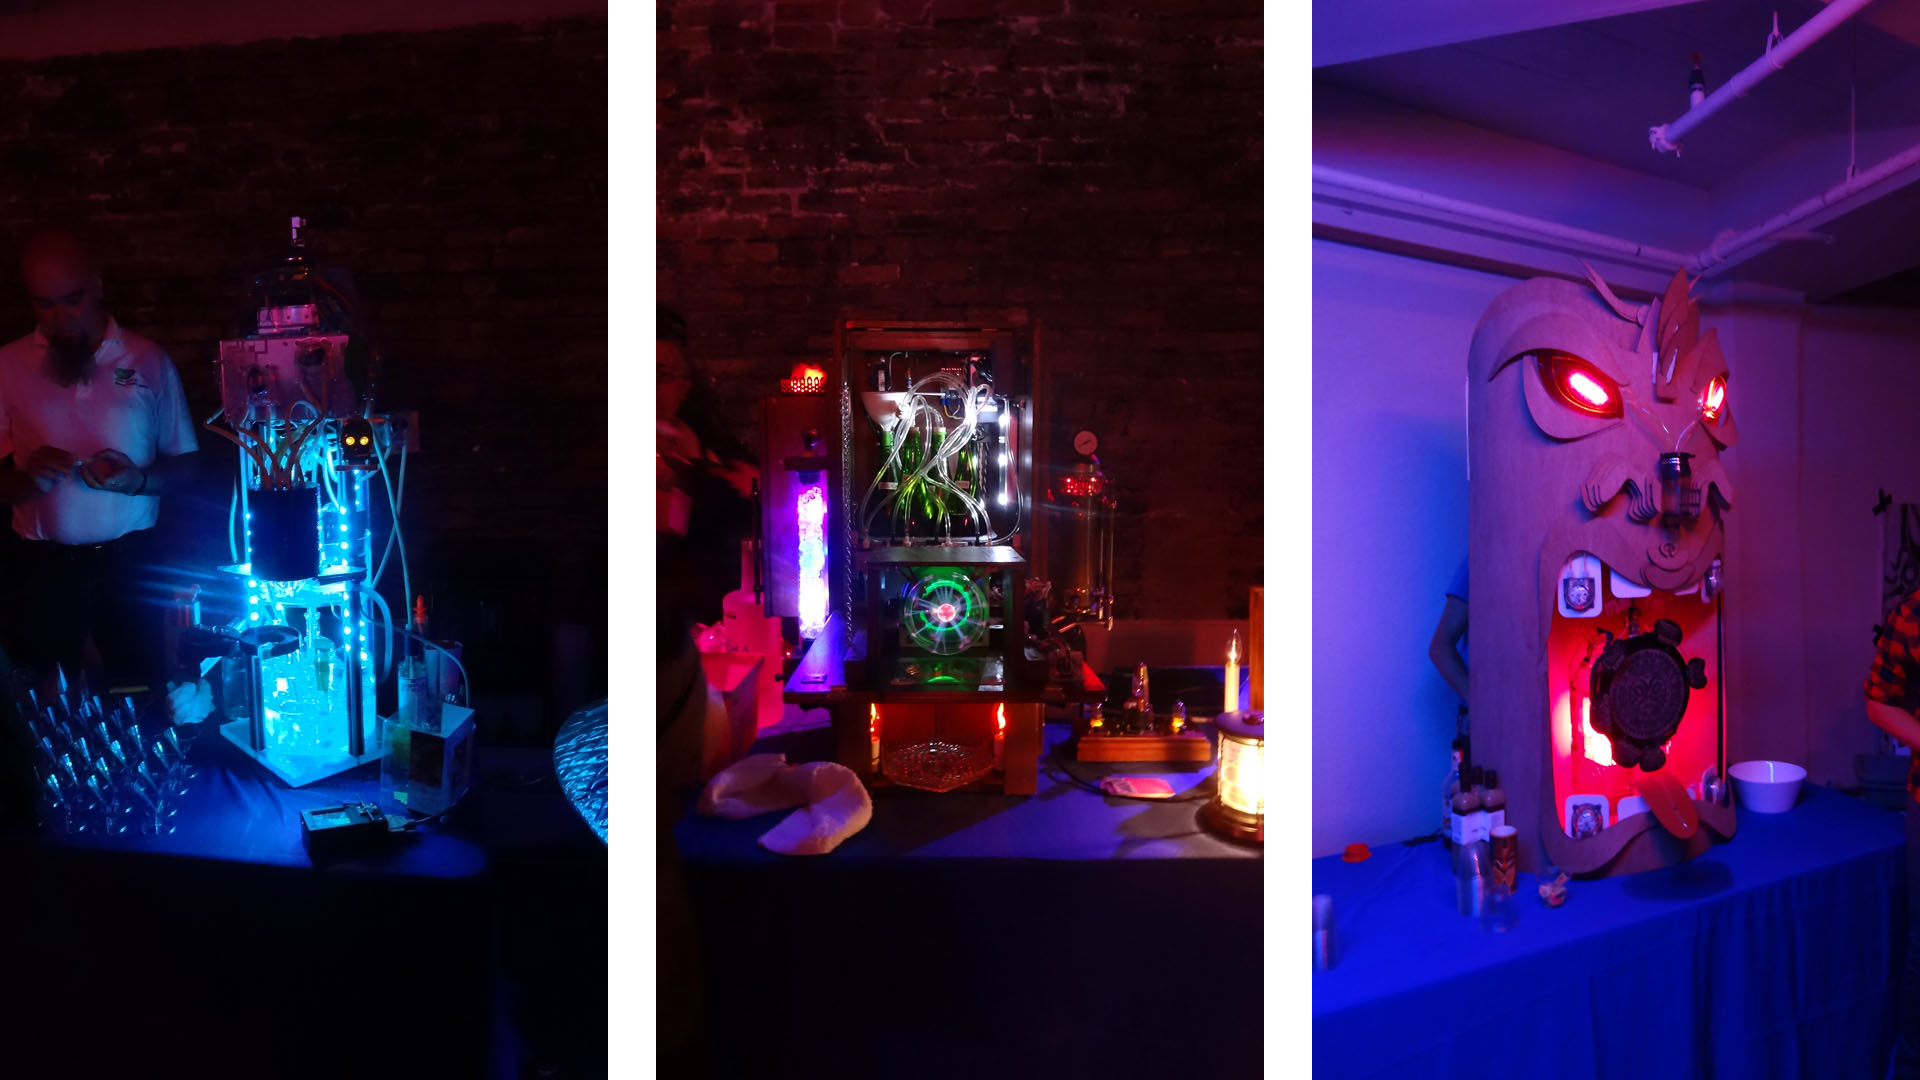 A San Francisco Cocktail Party Where The Bartenders Are All Robots